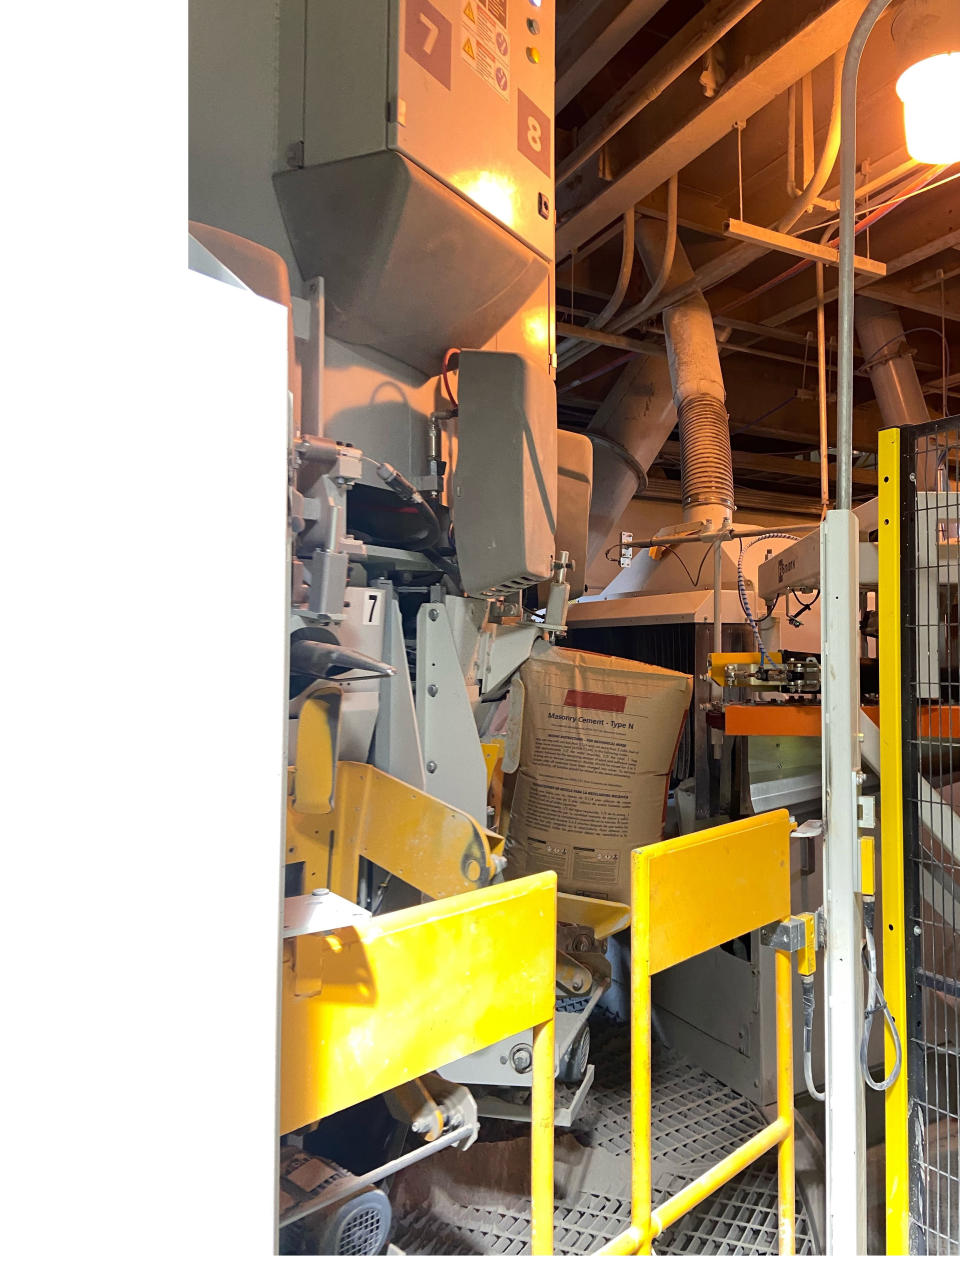 The bagging center and its packing system are the most recent innovations at the new Mitchell facility, which is the second largest cement plant in North America and one of the most technologically advanced and sustainable ever built.